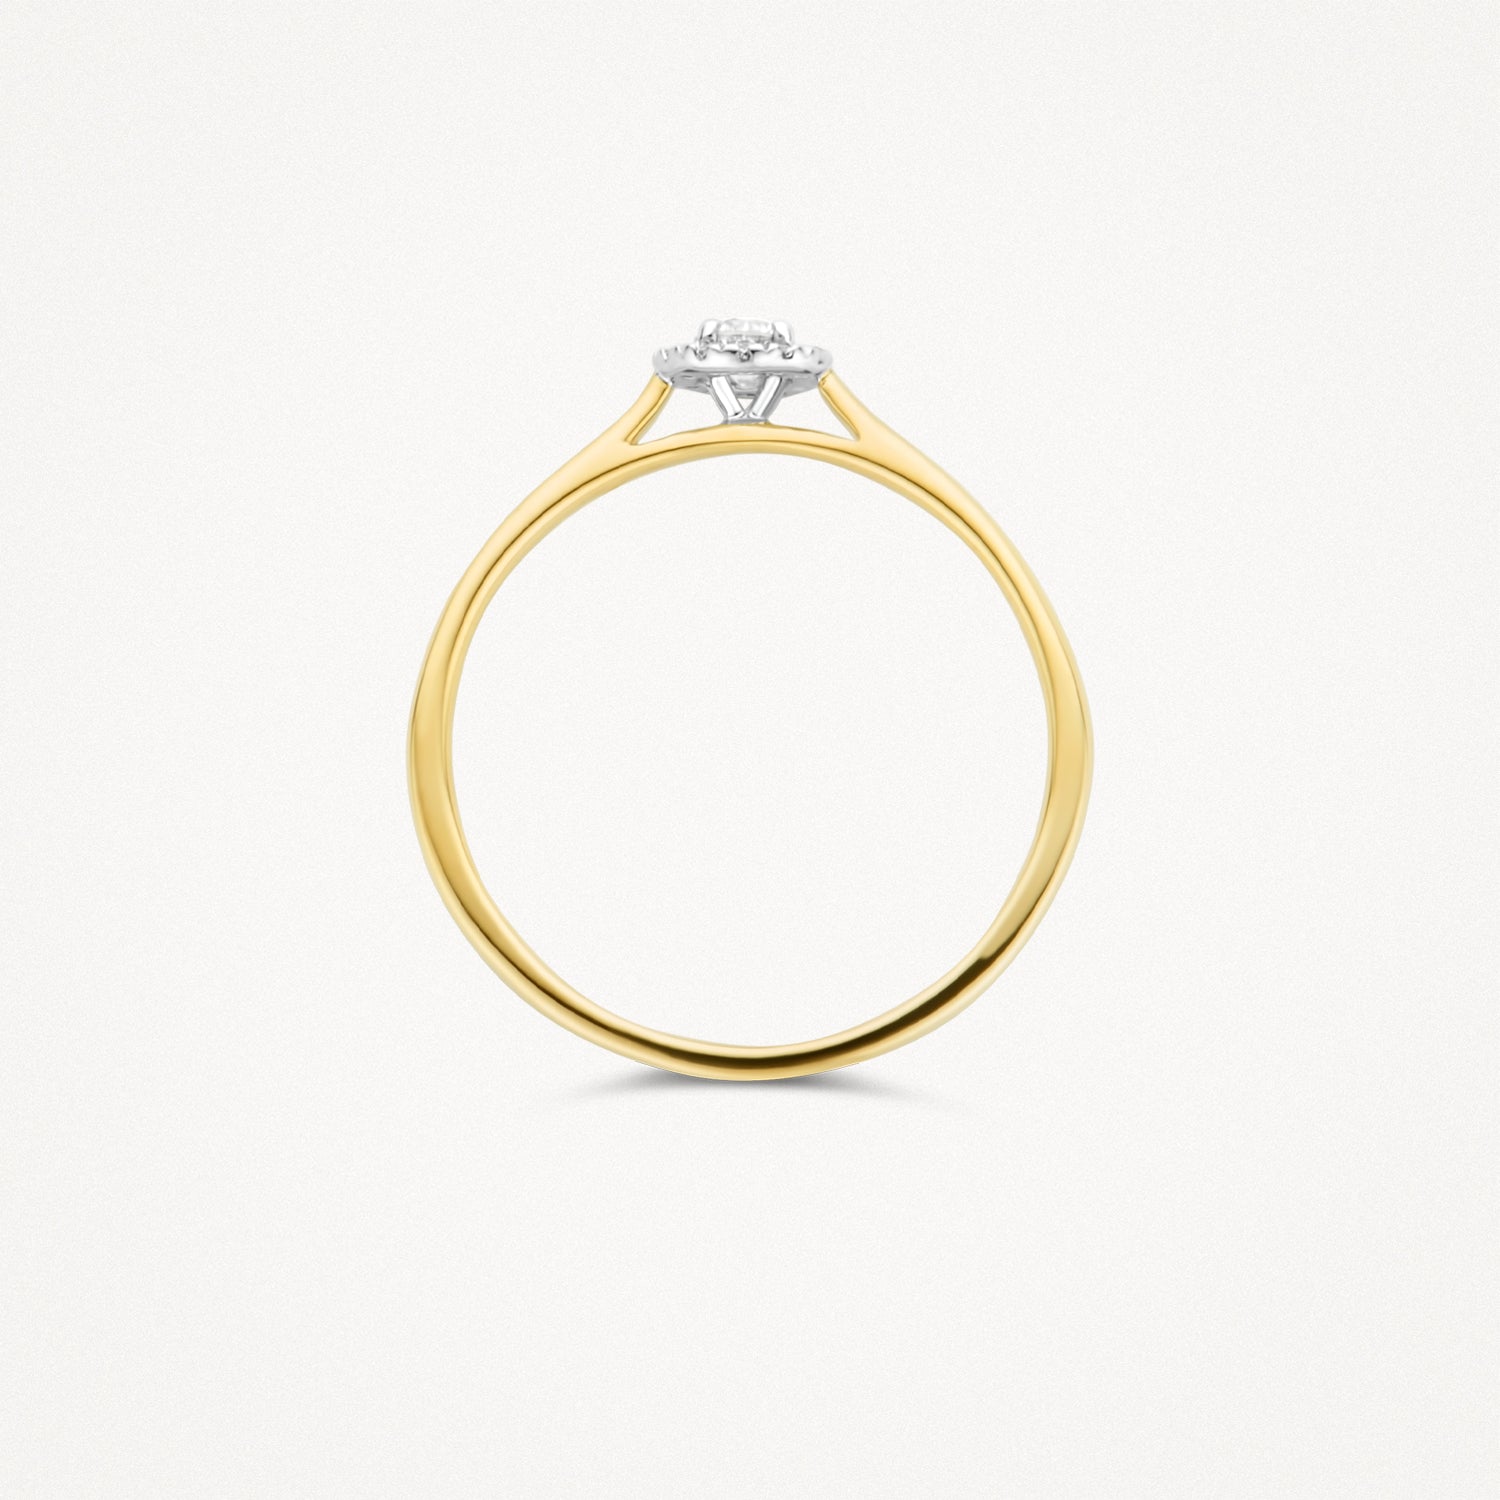 Ring 1648BDI - 14k Yellow and White Gold with diamond